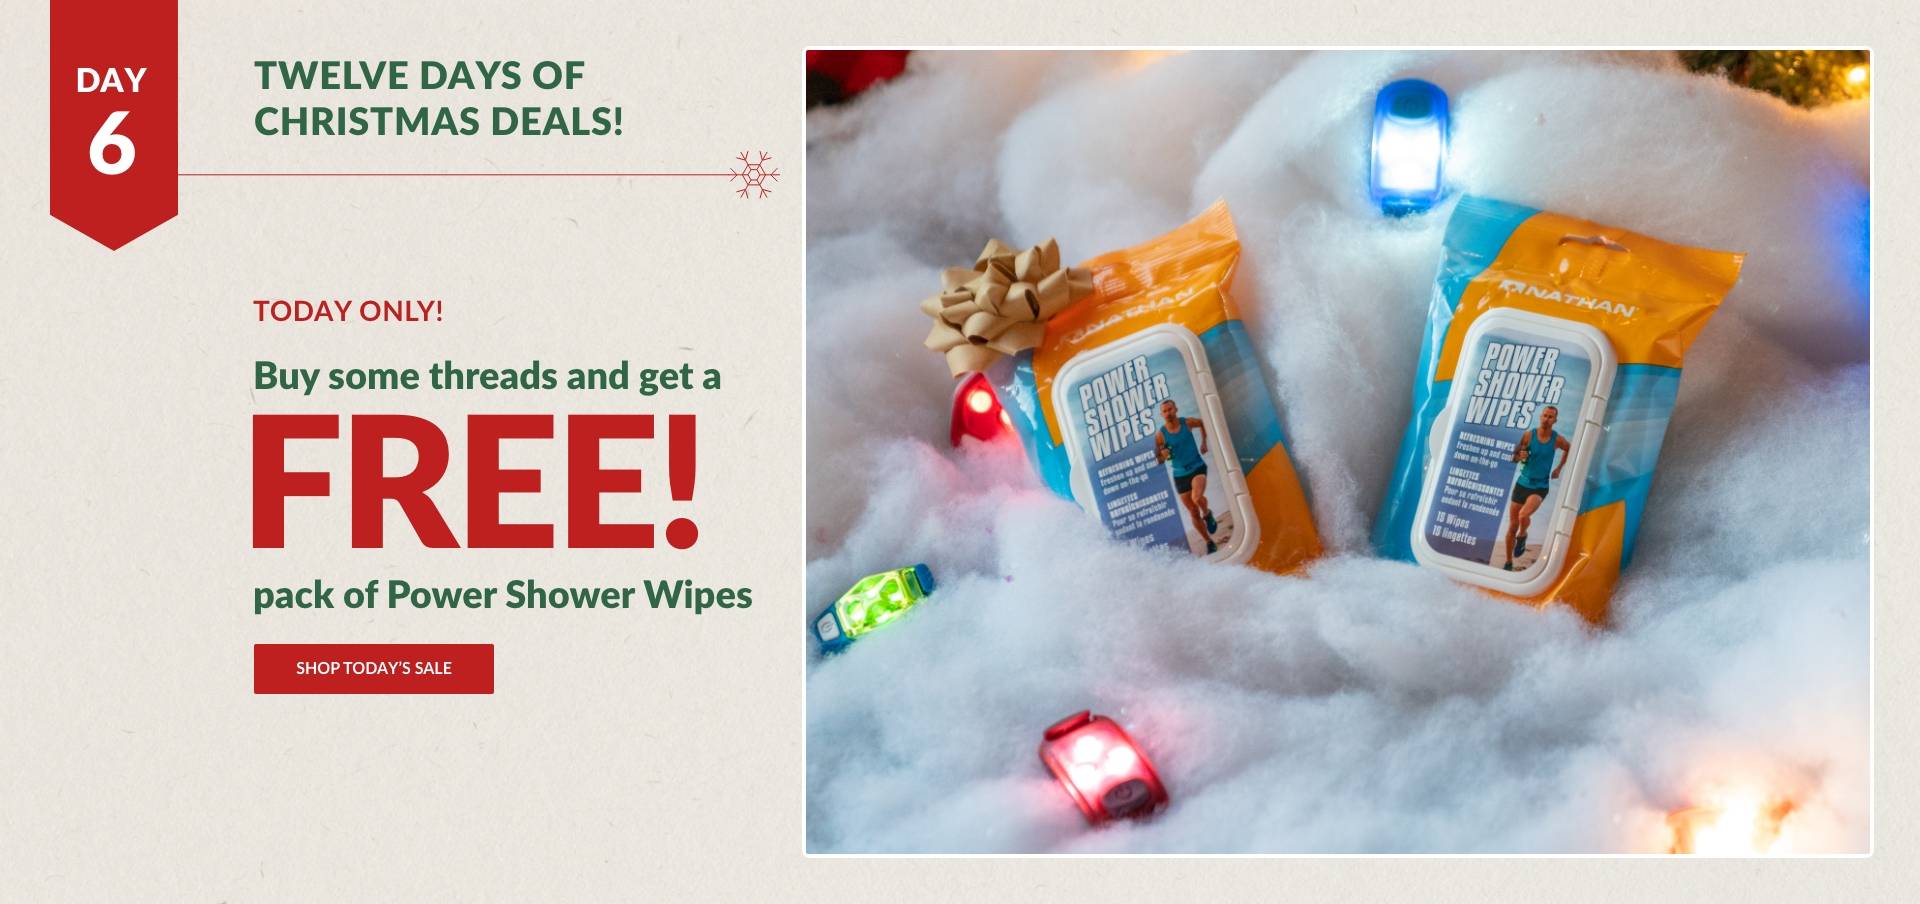 Today Only!! Free Pack of Power Shower Wipes w/Any Apparel Purchase - Shop Today's Sale